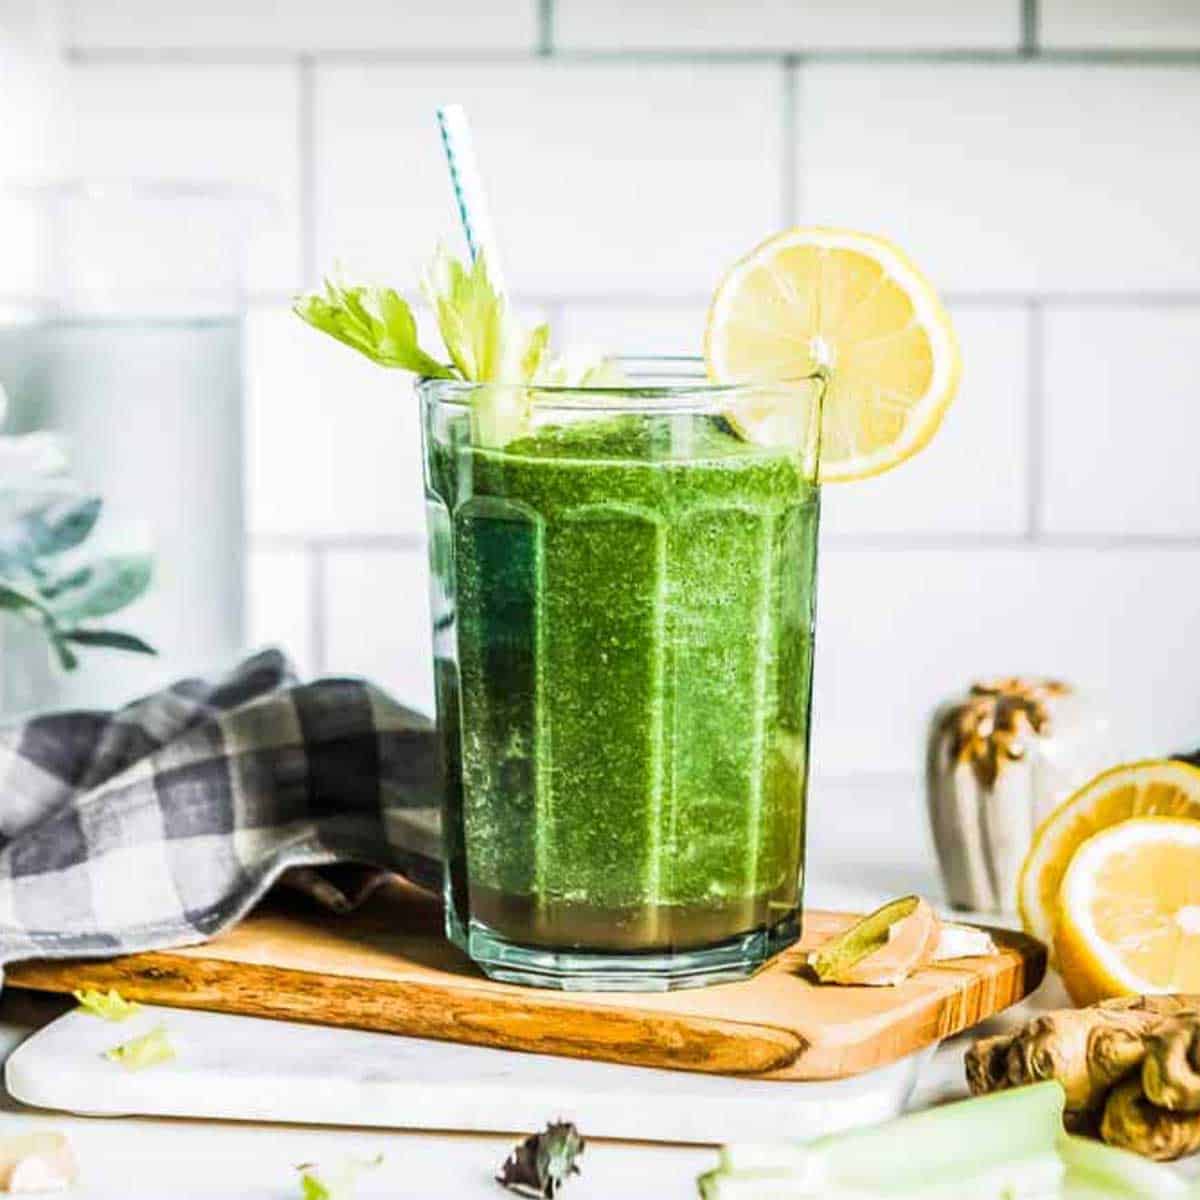 https://simplegreensmoothies.com/wp-content/uploads/Vegetable-smoothie-recipes-best-vegetables-for-smoothies-veggie-smoothie-recipe-simple-green-smoothies-featured.jpg